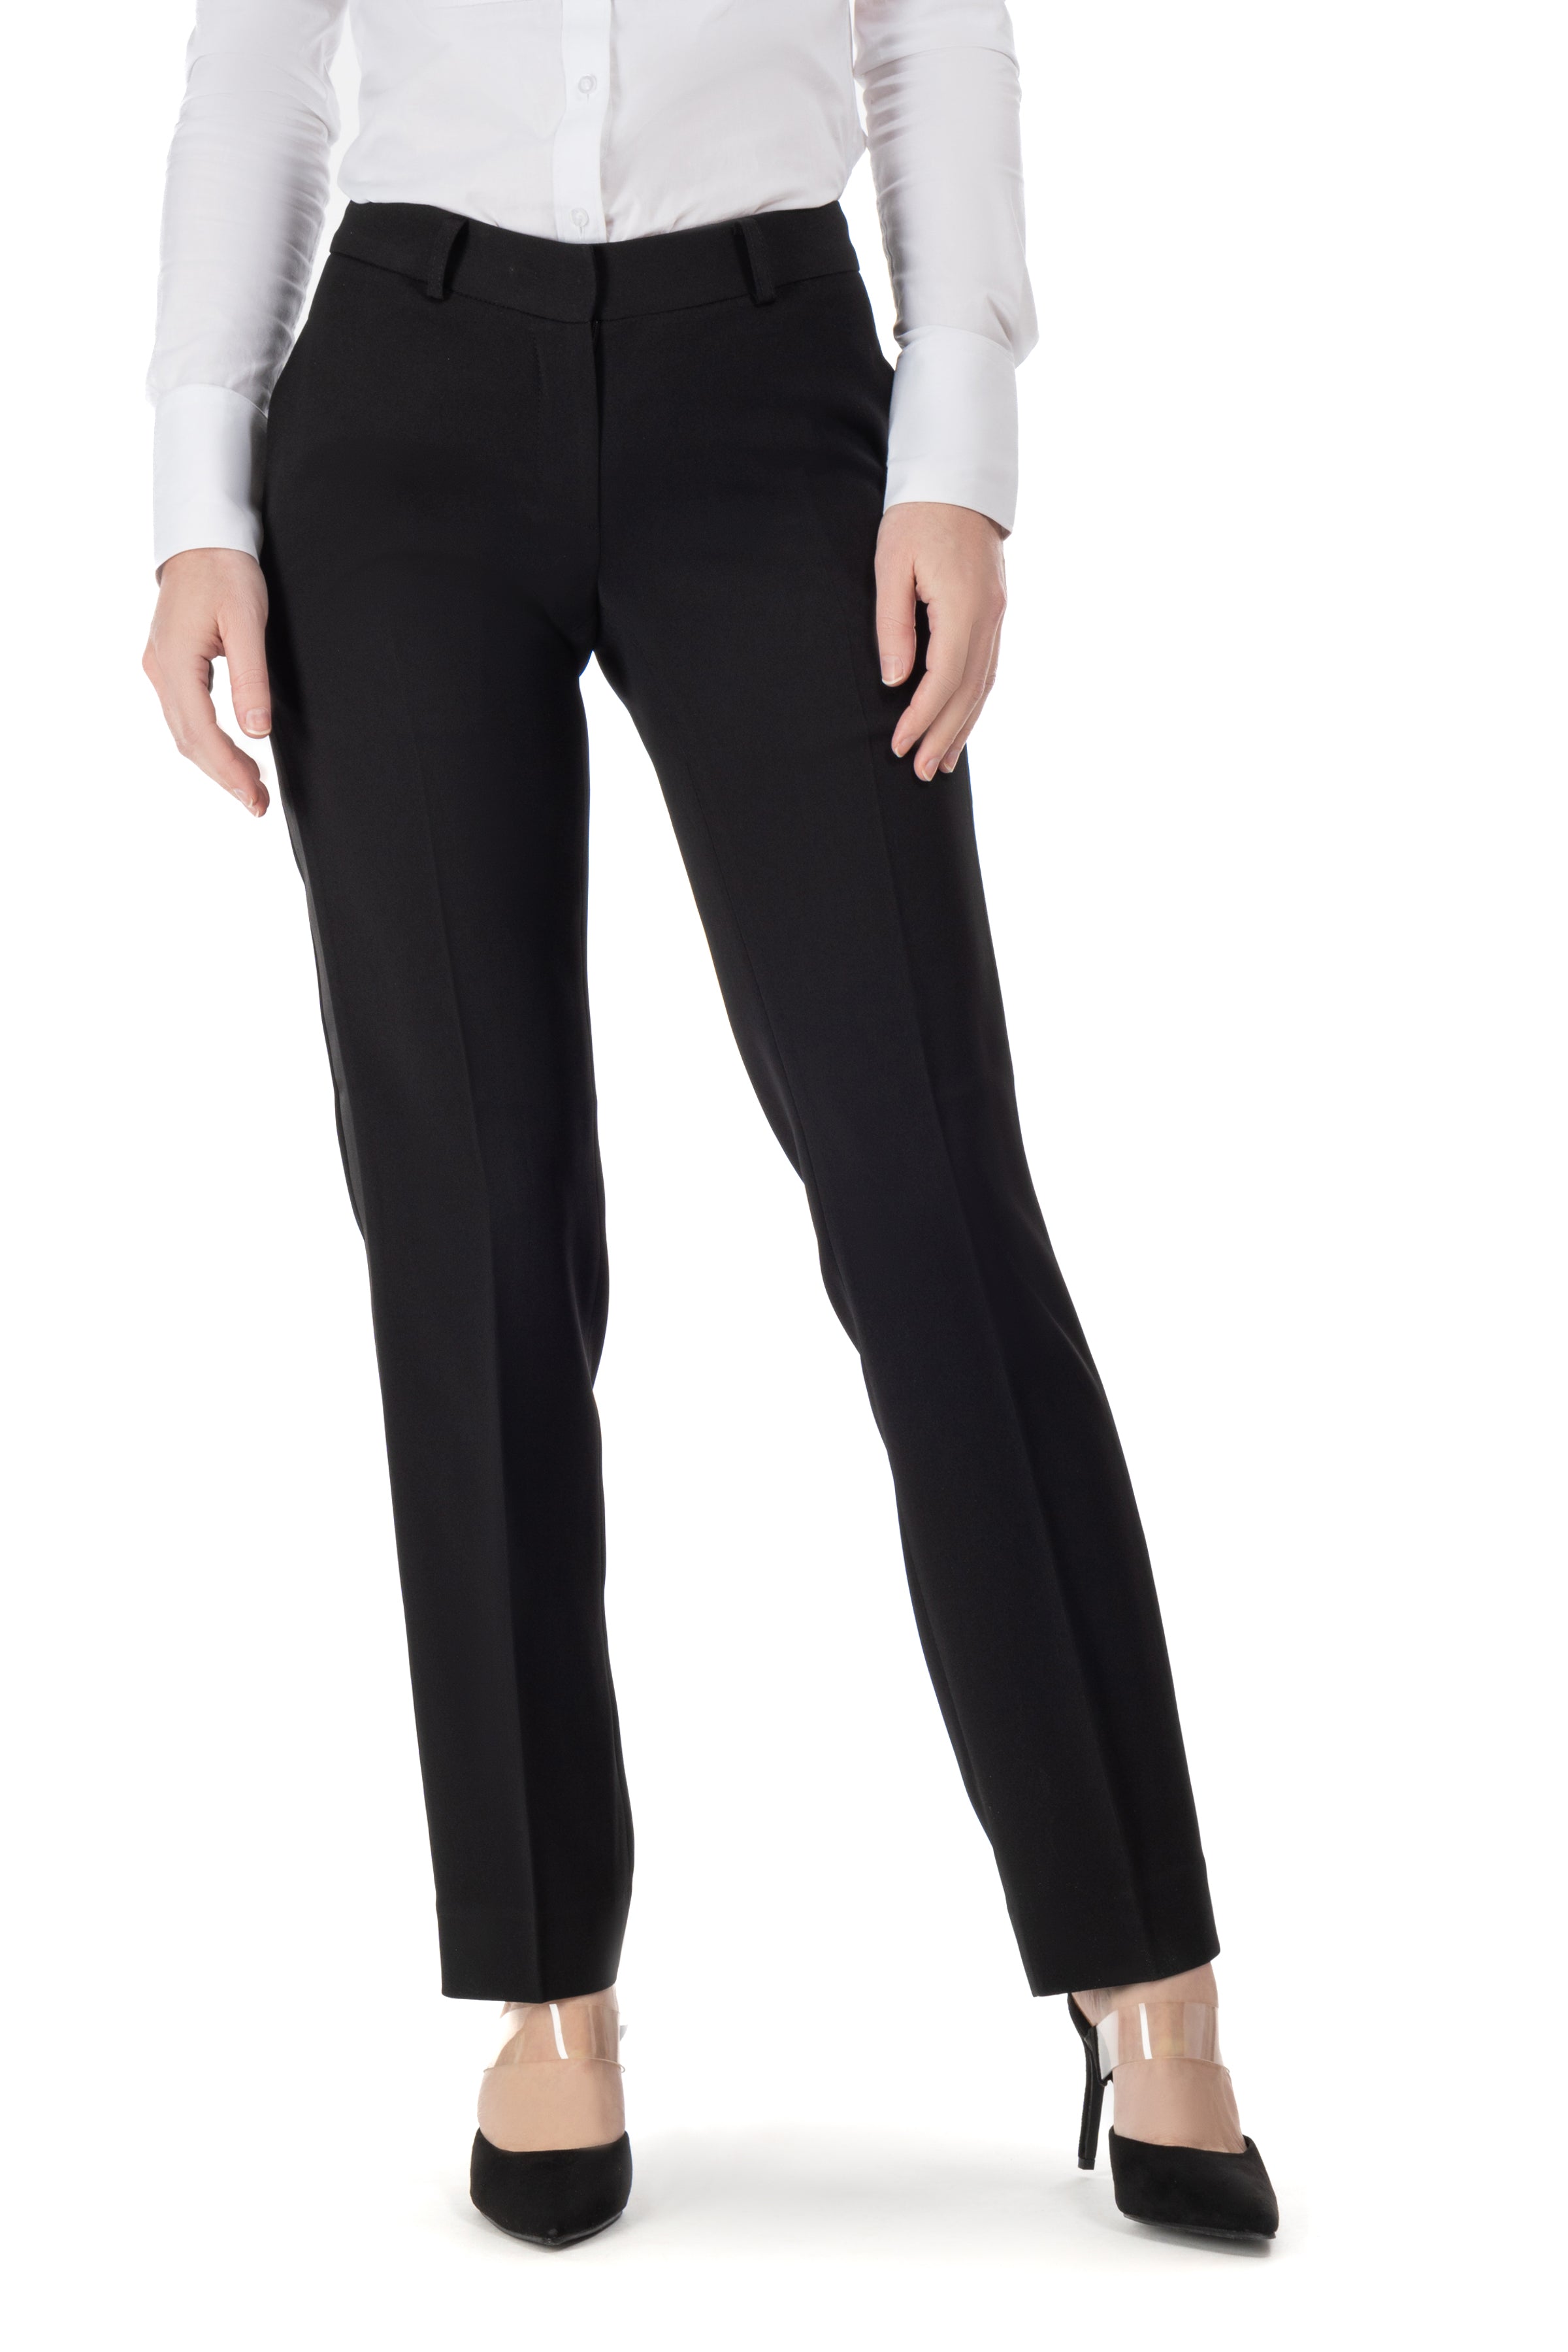 Buy Peter England Men Checked Slim Fit Formal Trousers - Trousers for Men  22245726 | Myntra